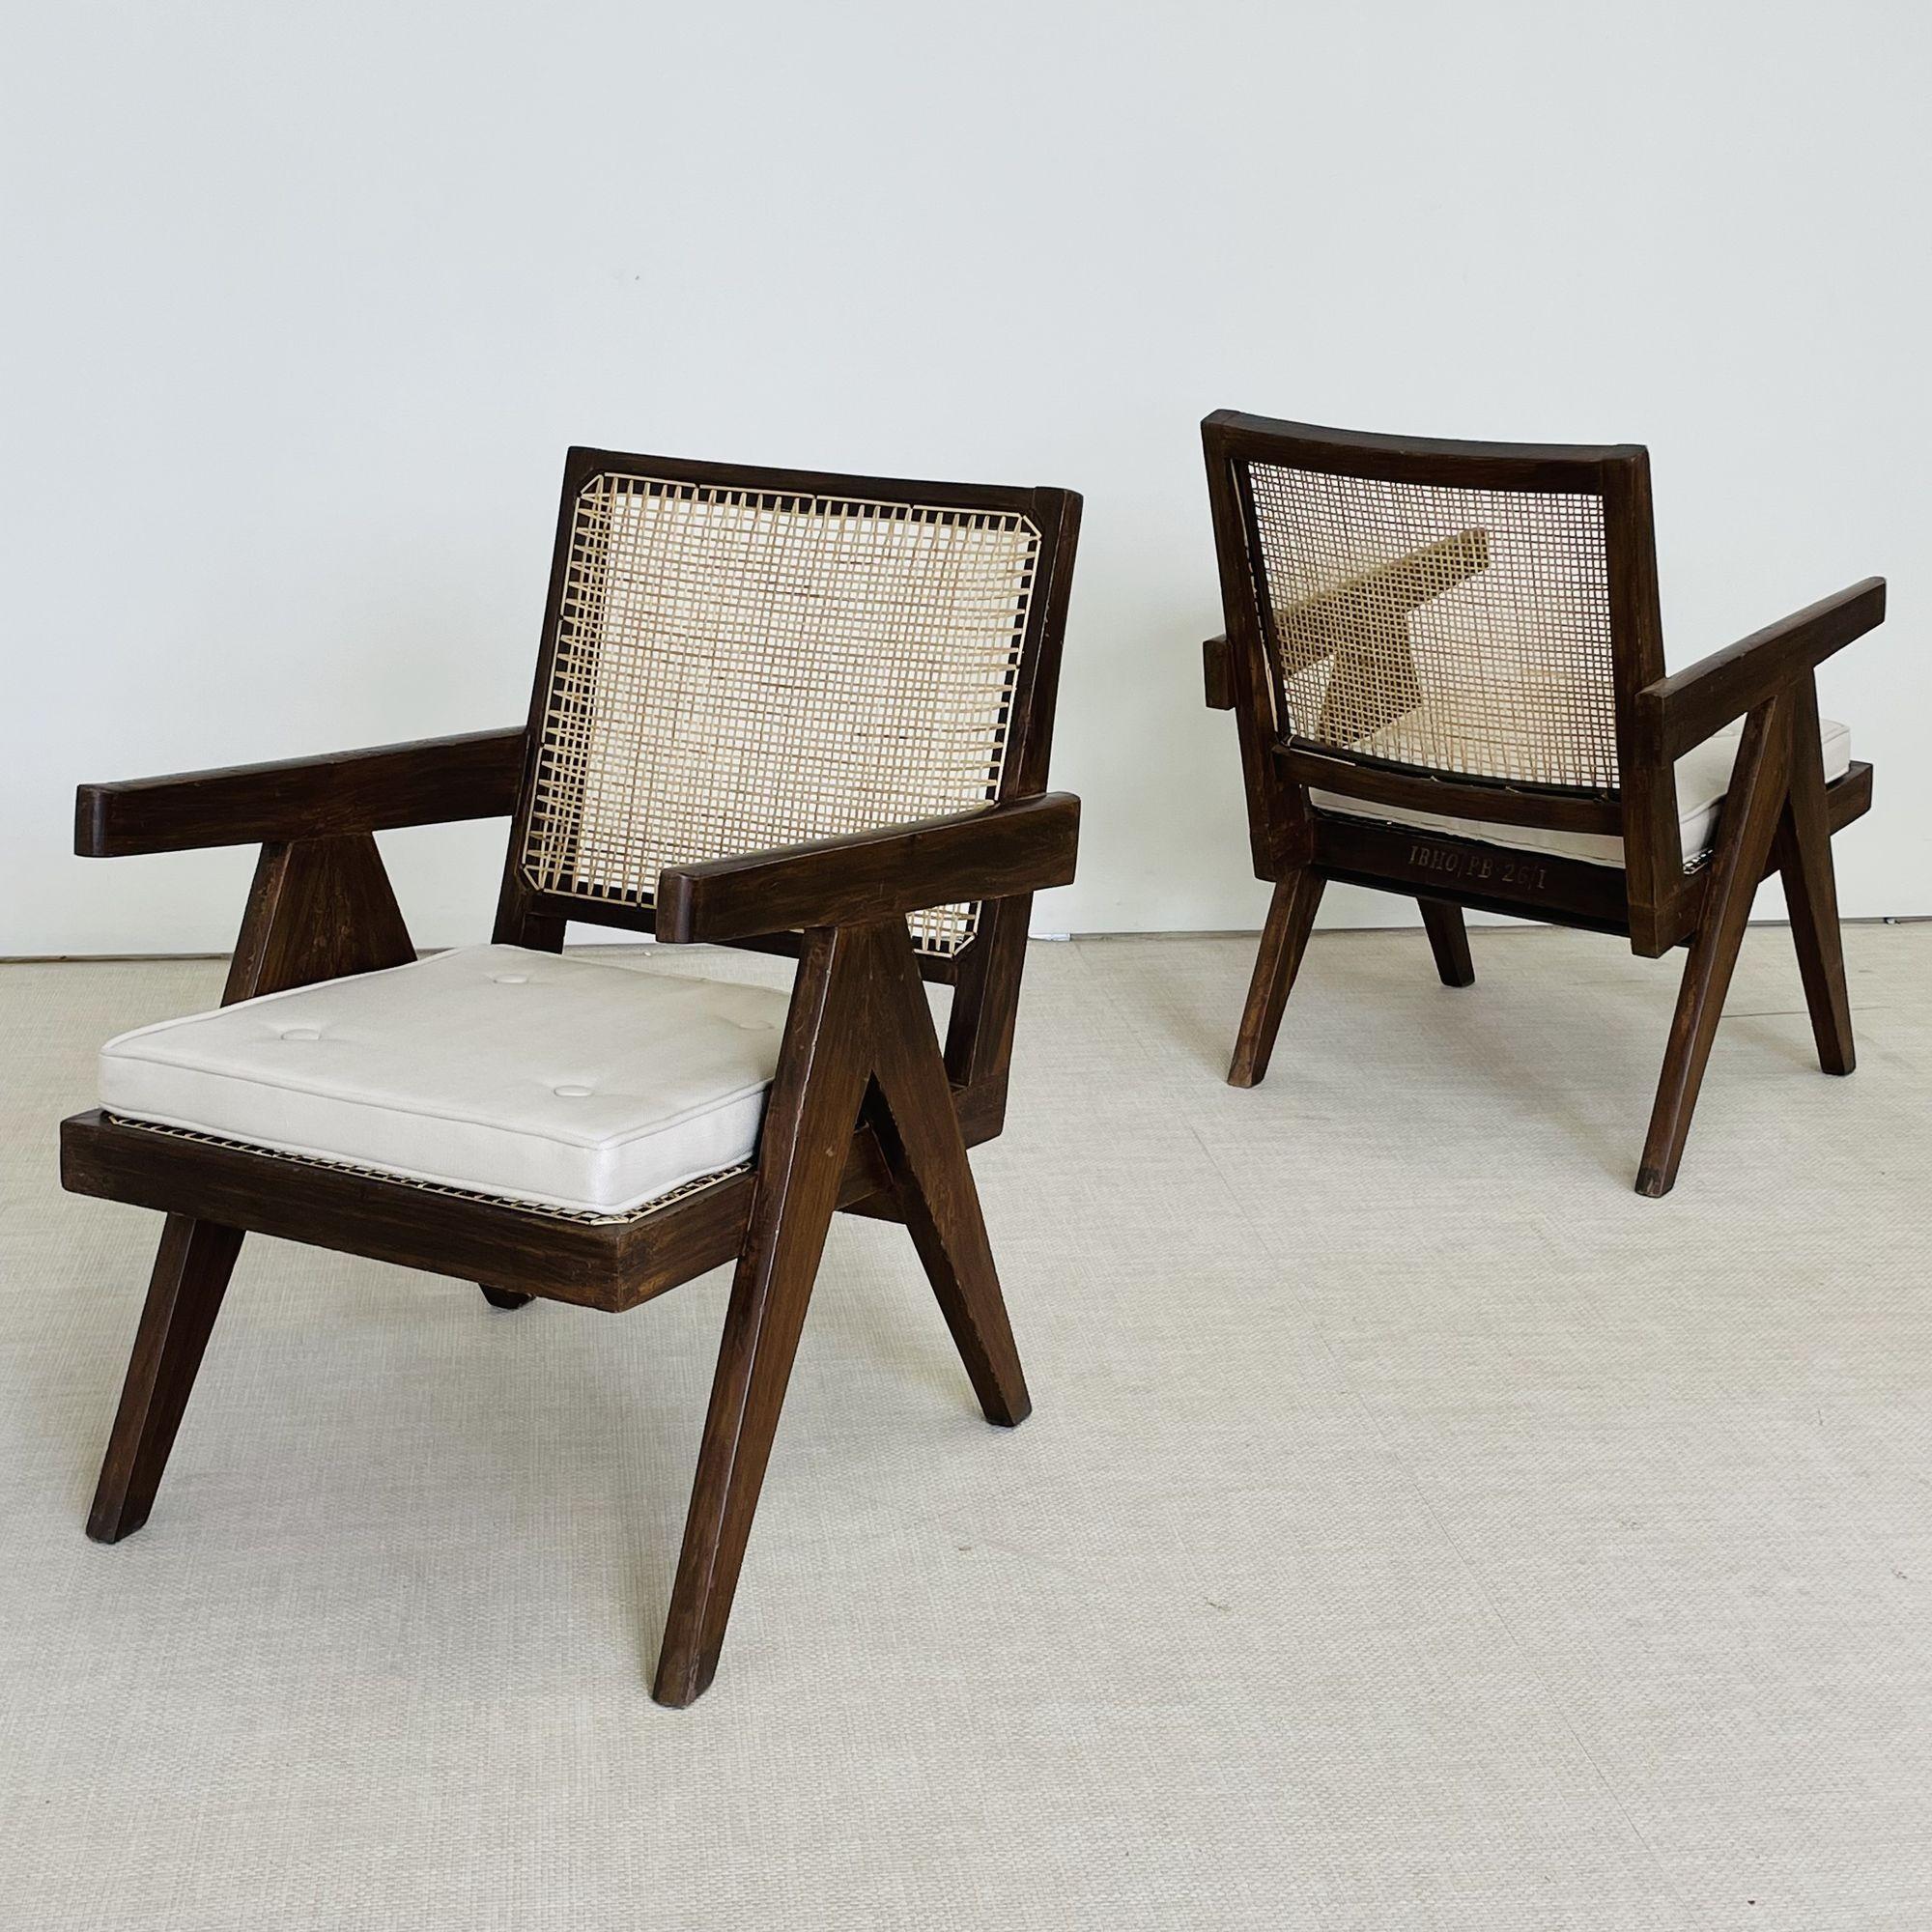 Indian Pierre Jeanneret, French Mid-Century Modern, Lounge Chairs, Cane, Chandigarh For Sale